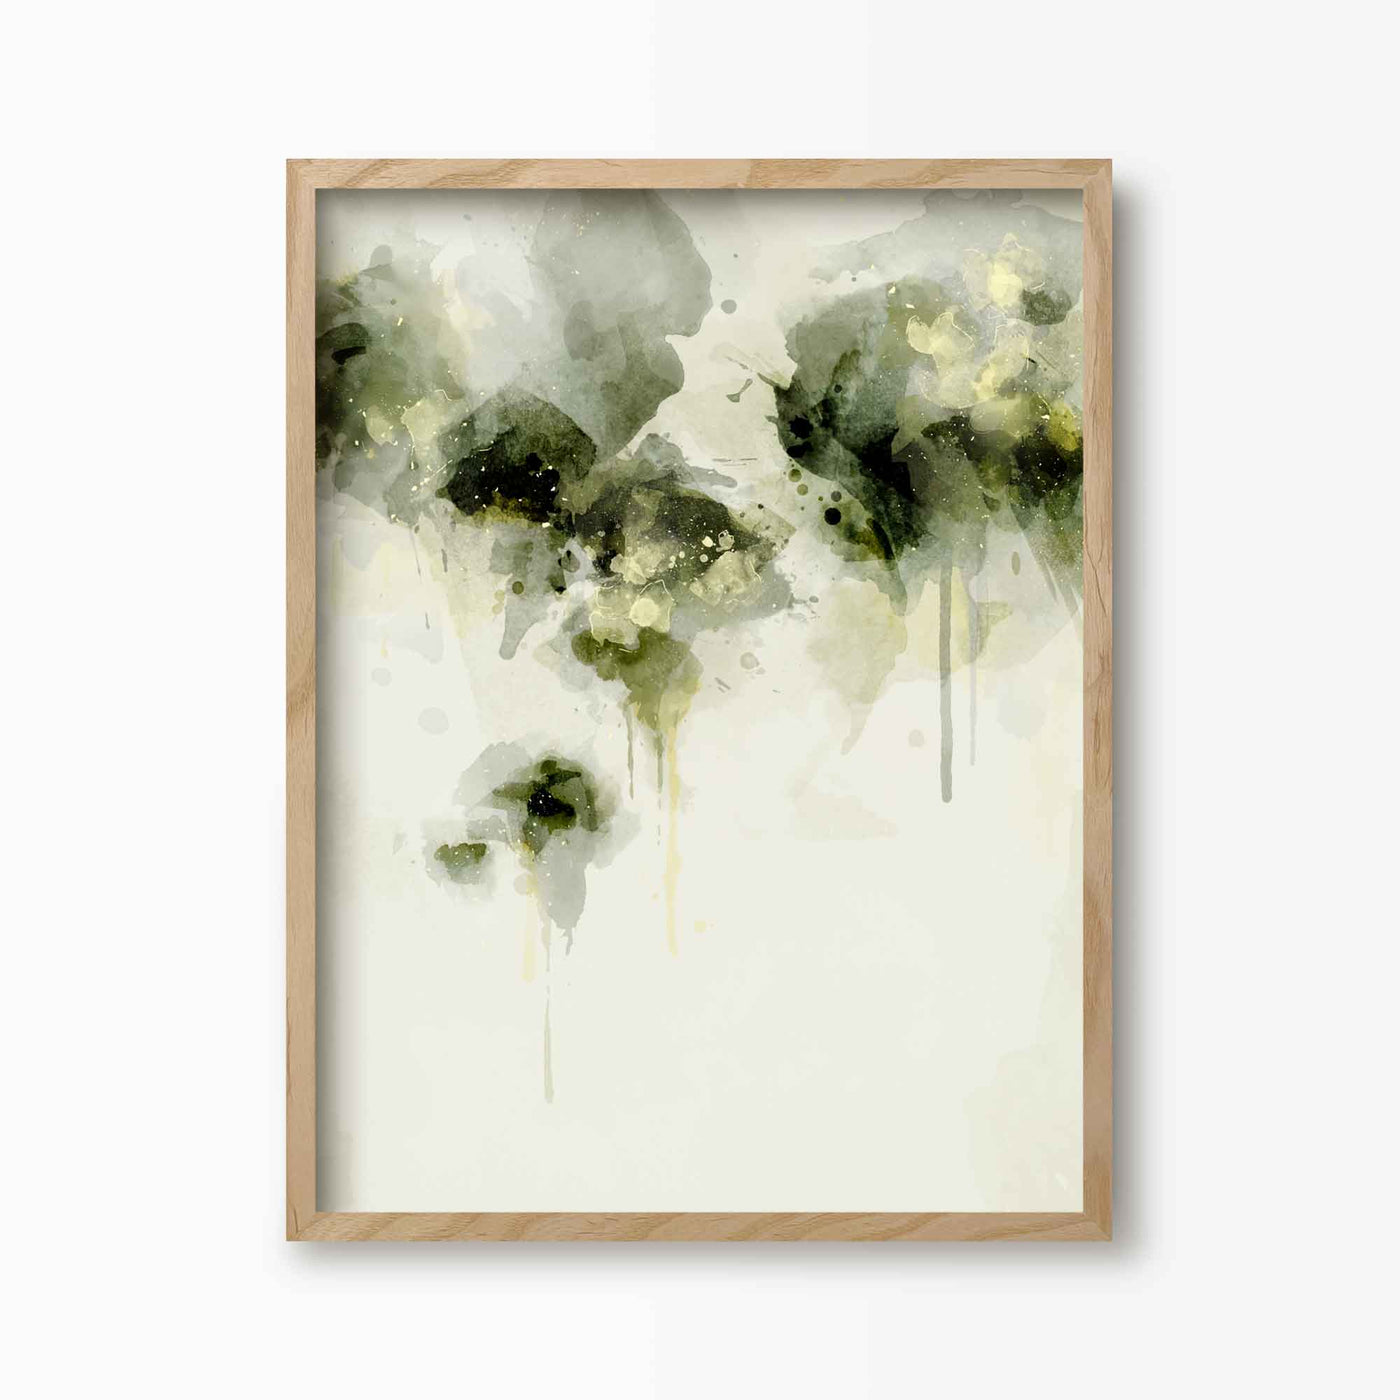 Green Lili 30x40cm (12x16") / Natural Frame Misty Morning Abstract Floral Print